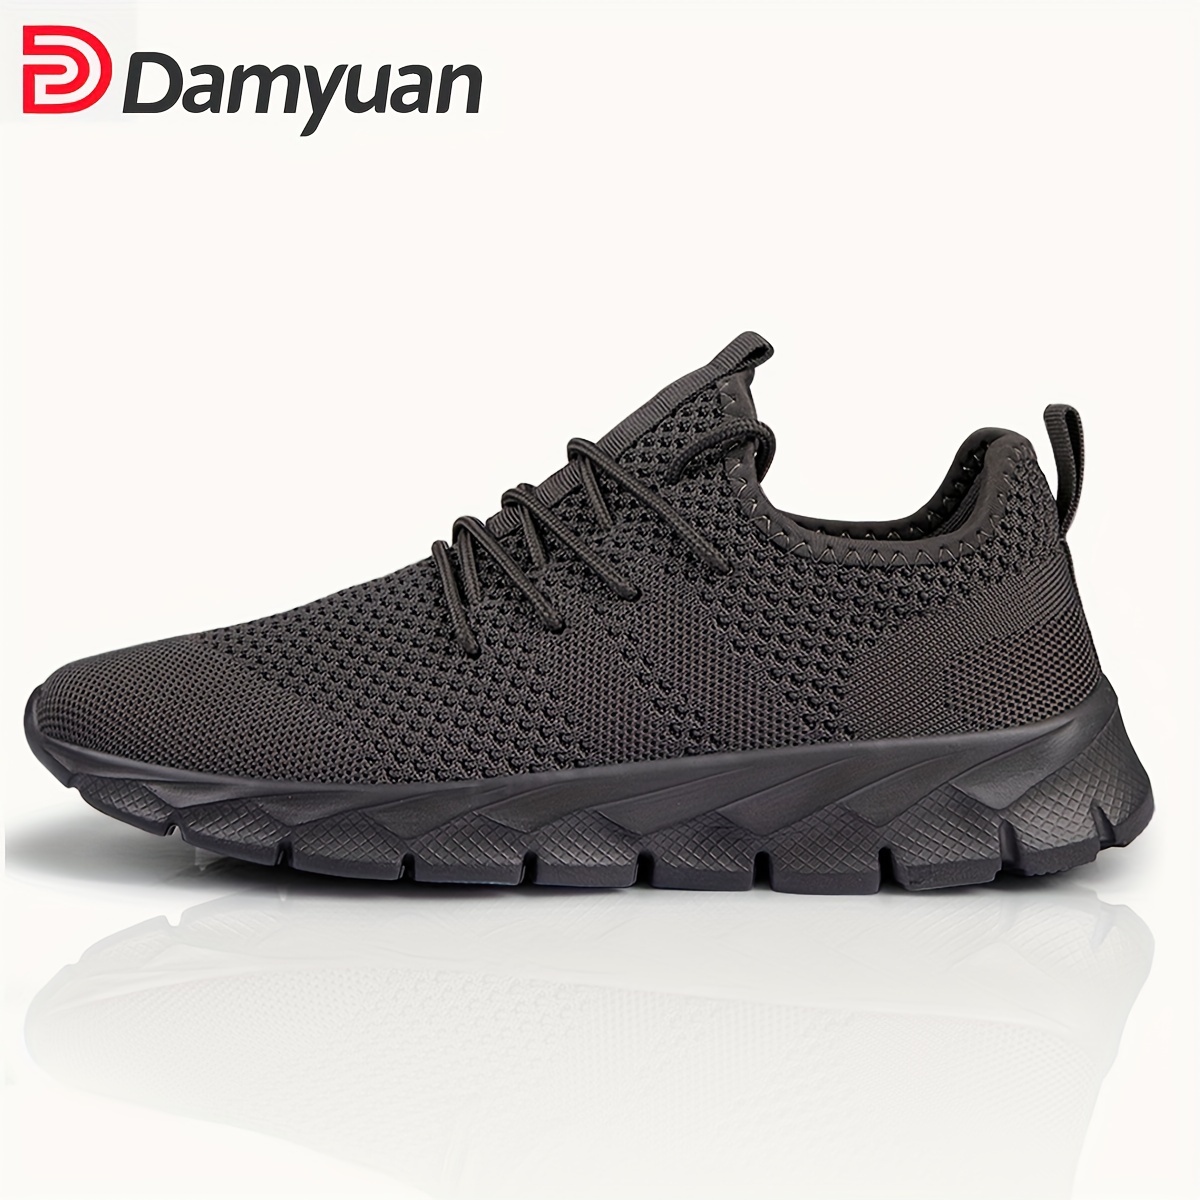 Men's Running Shoes Shock-absorbing Sneakers - Athletic Shoes - Breathable Lace-ups